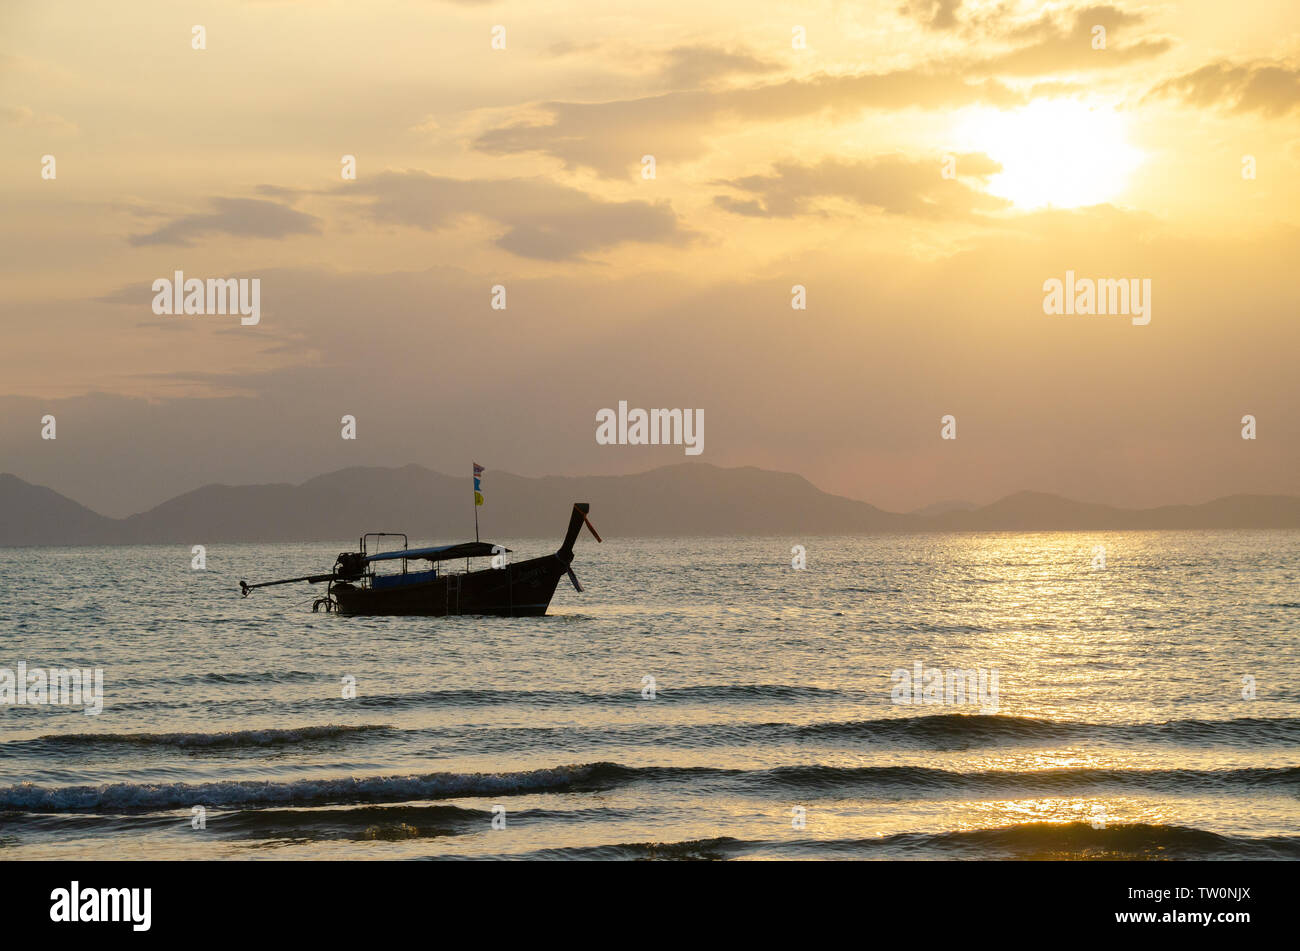 Thai long-tail boats on beach at sunset Stock Photo